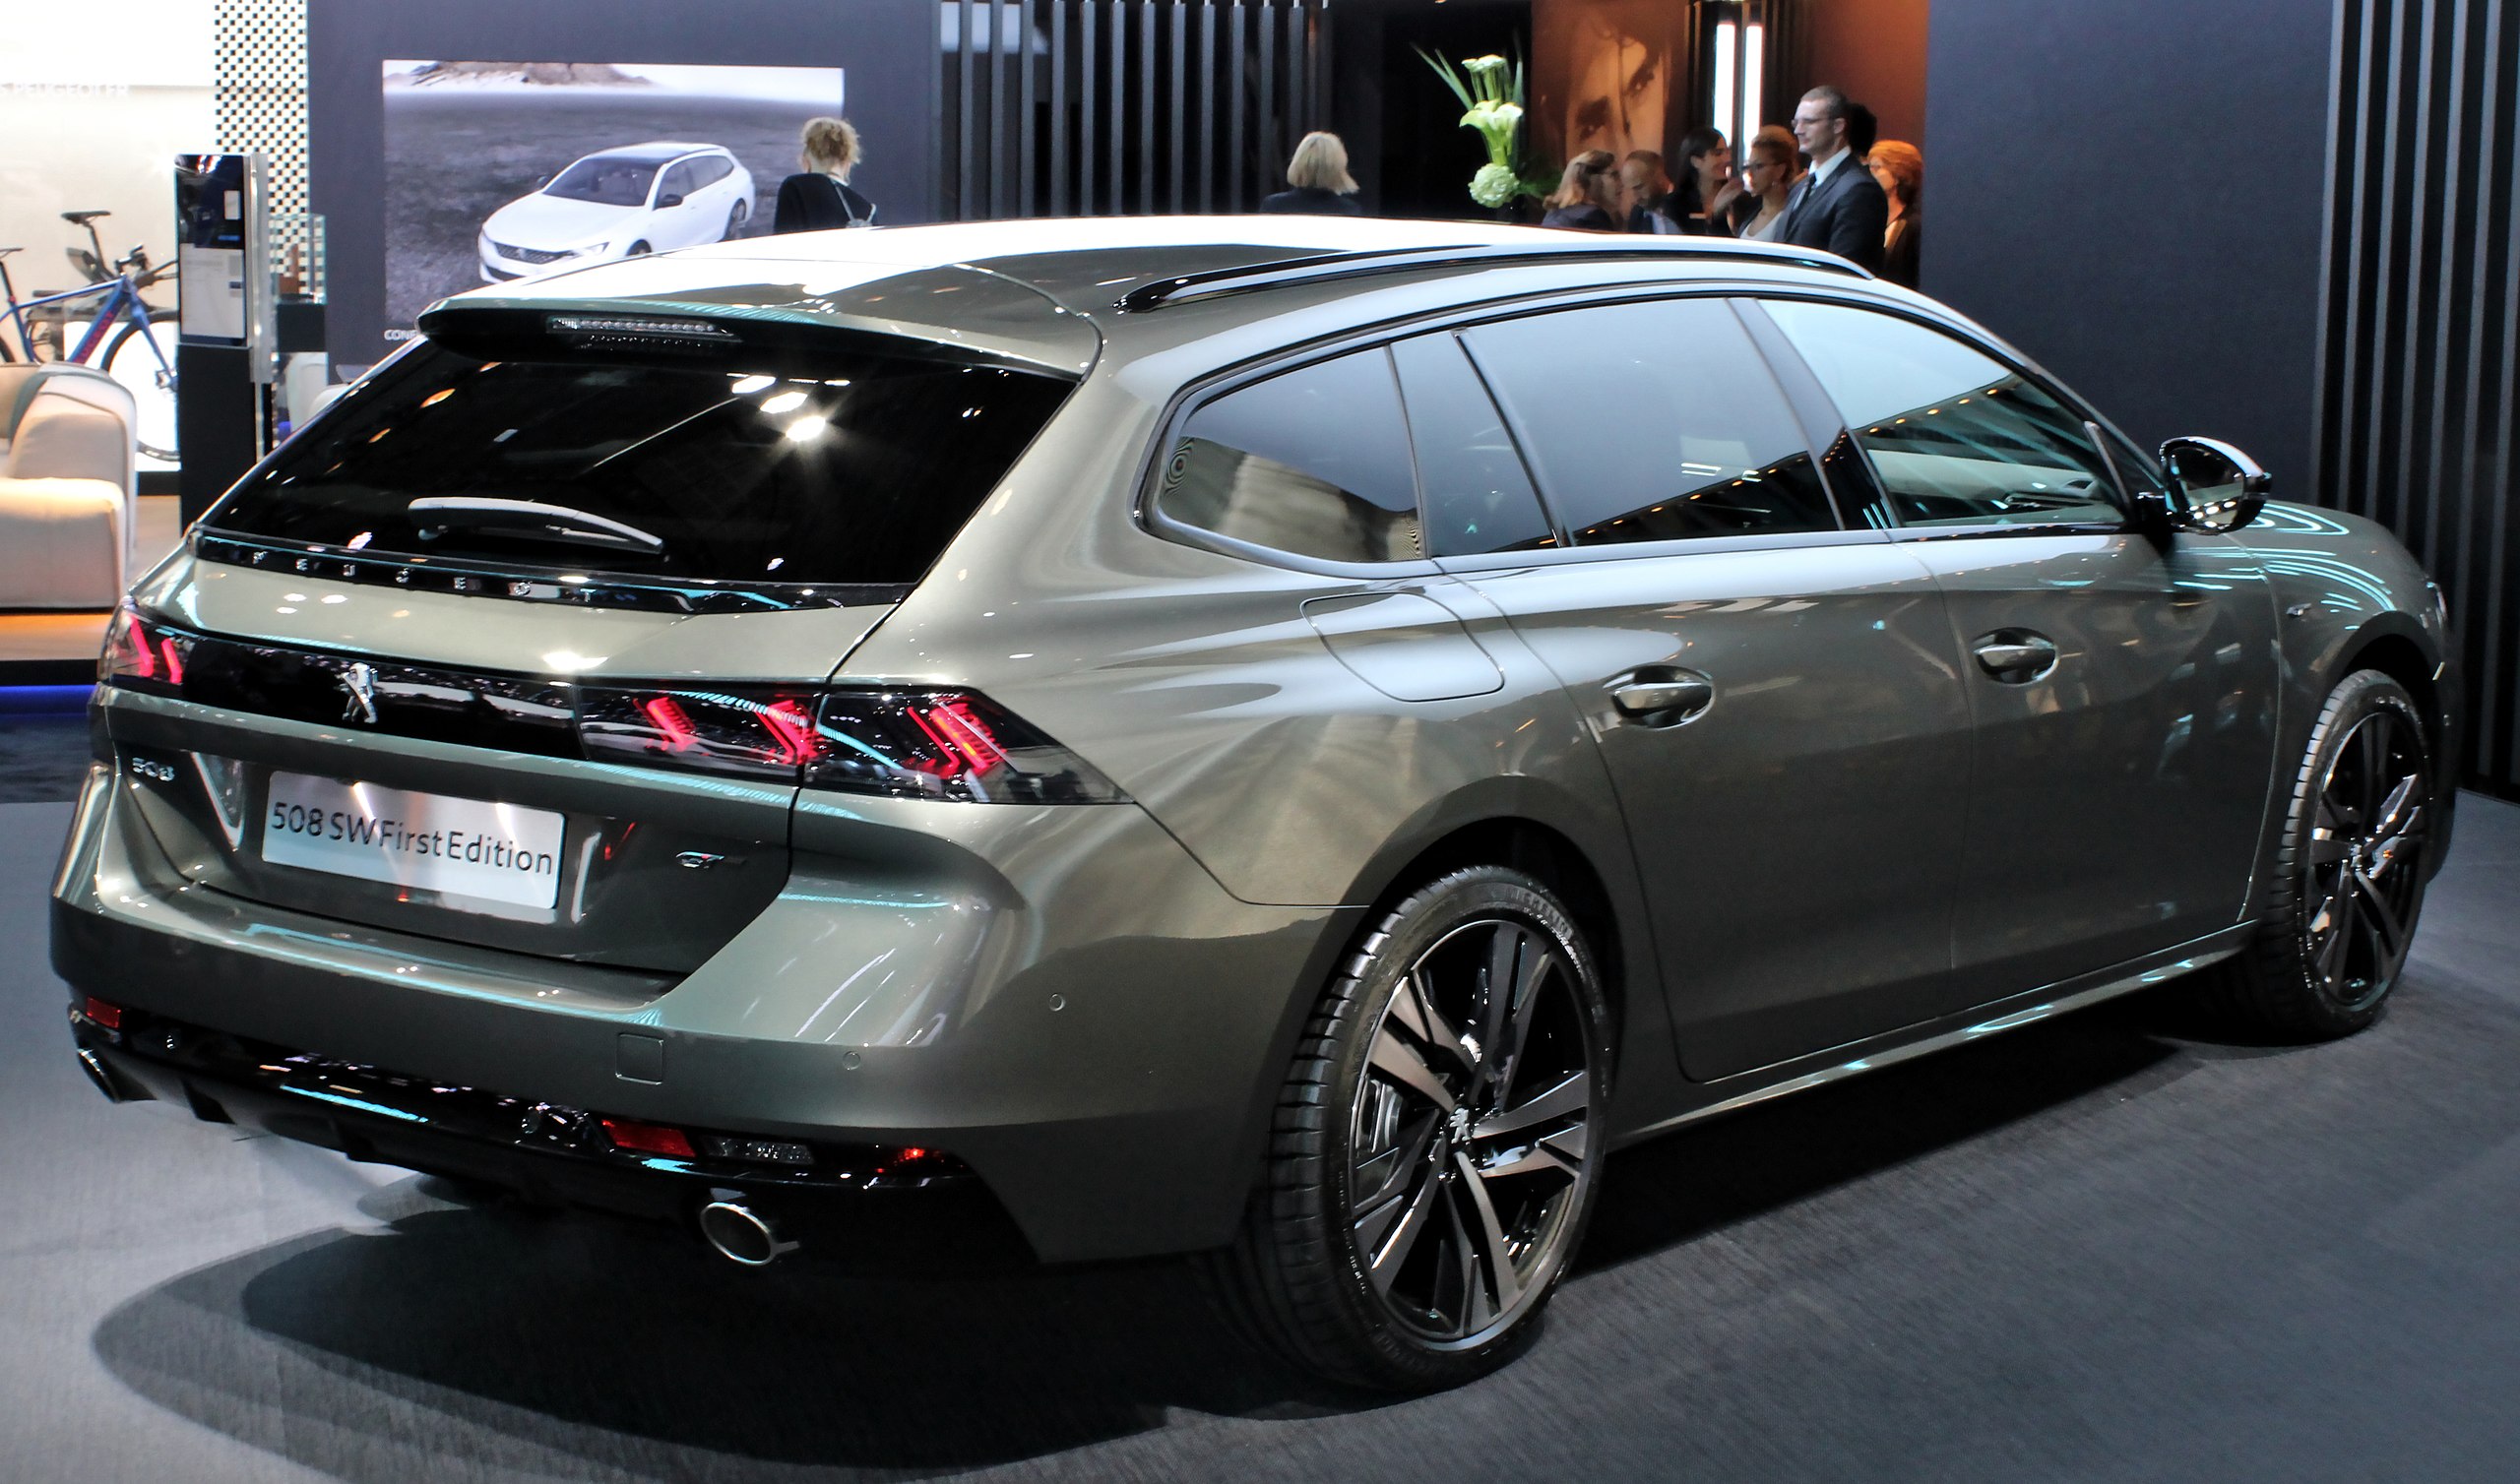 File:Peugeot 508 SW First Edition, Paris Motor Show 2018, IMG 0684